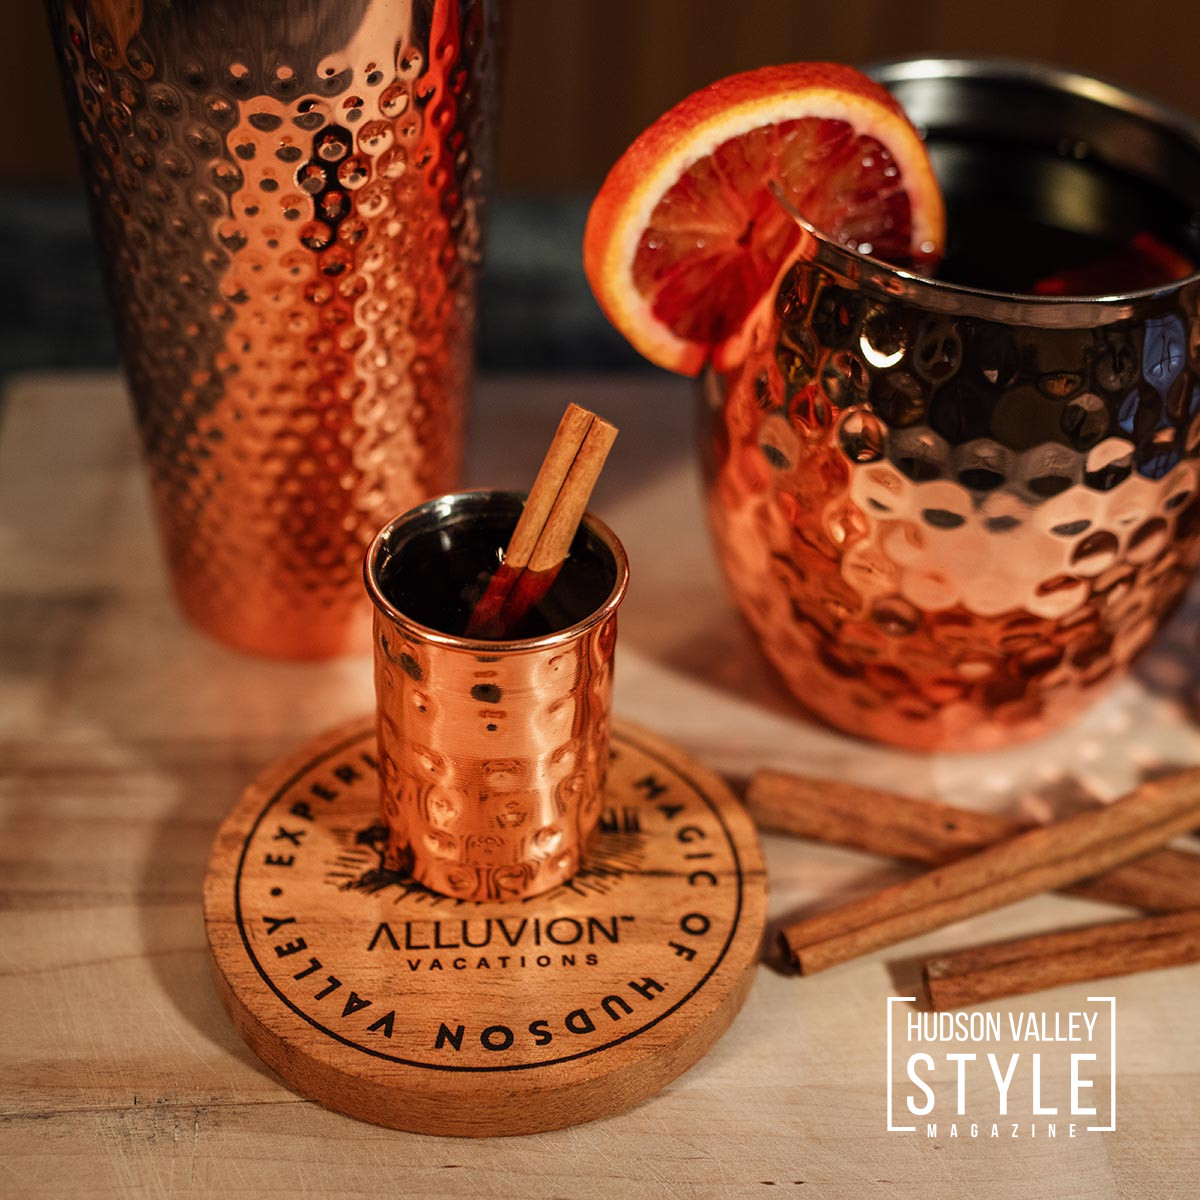 The Perfect Mulled Wine and Mulled Wine Shots for Your Hudson Valley Getaway – Hudson Valley Style Mixology and Wellness Travel 101 with Maxwell Alexander – Presented by Alluvion Vacations